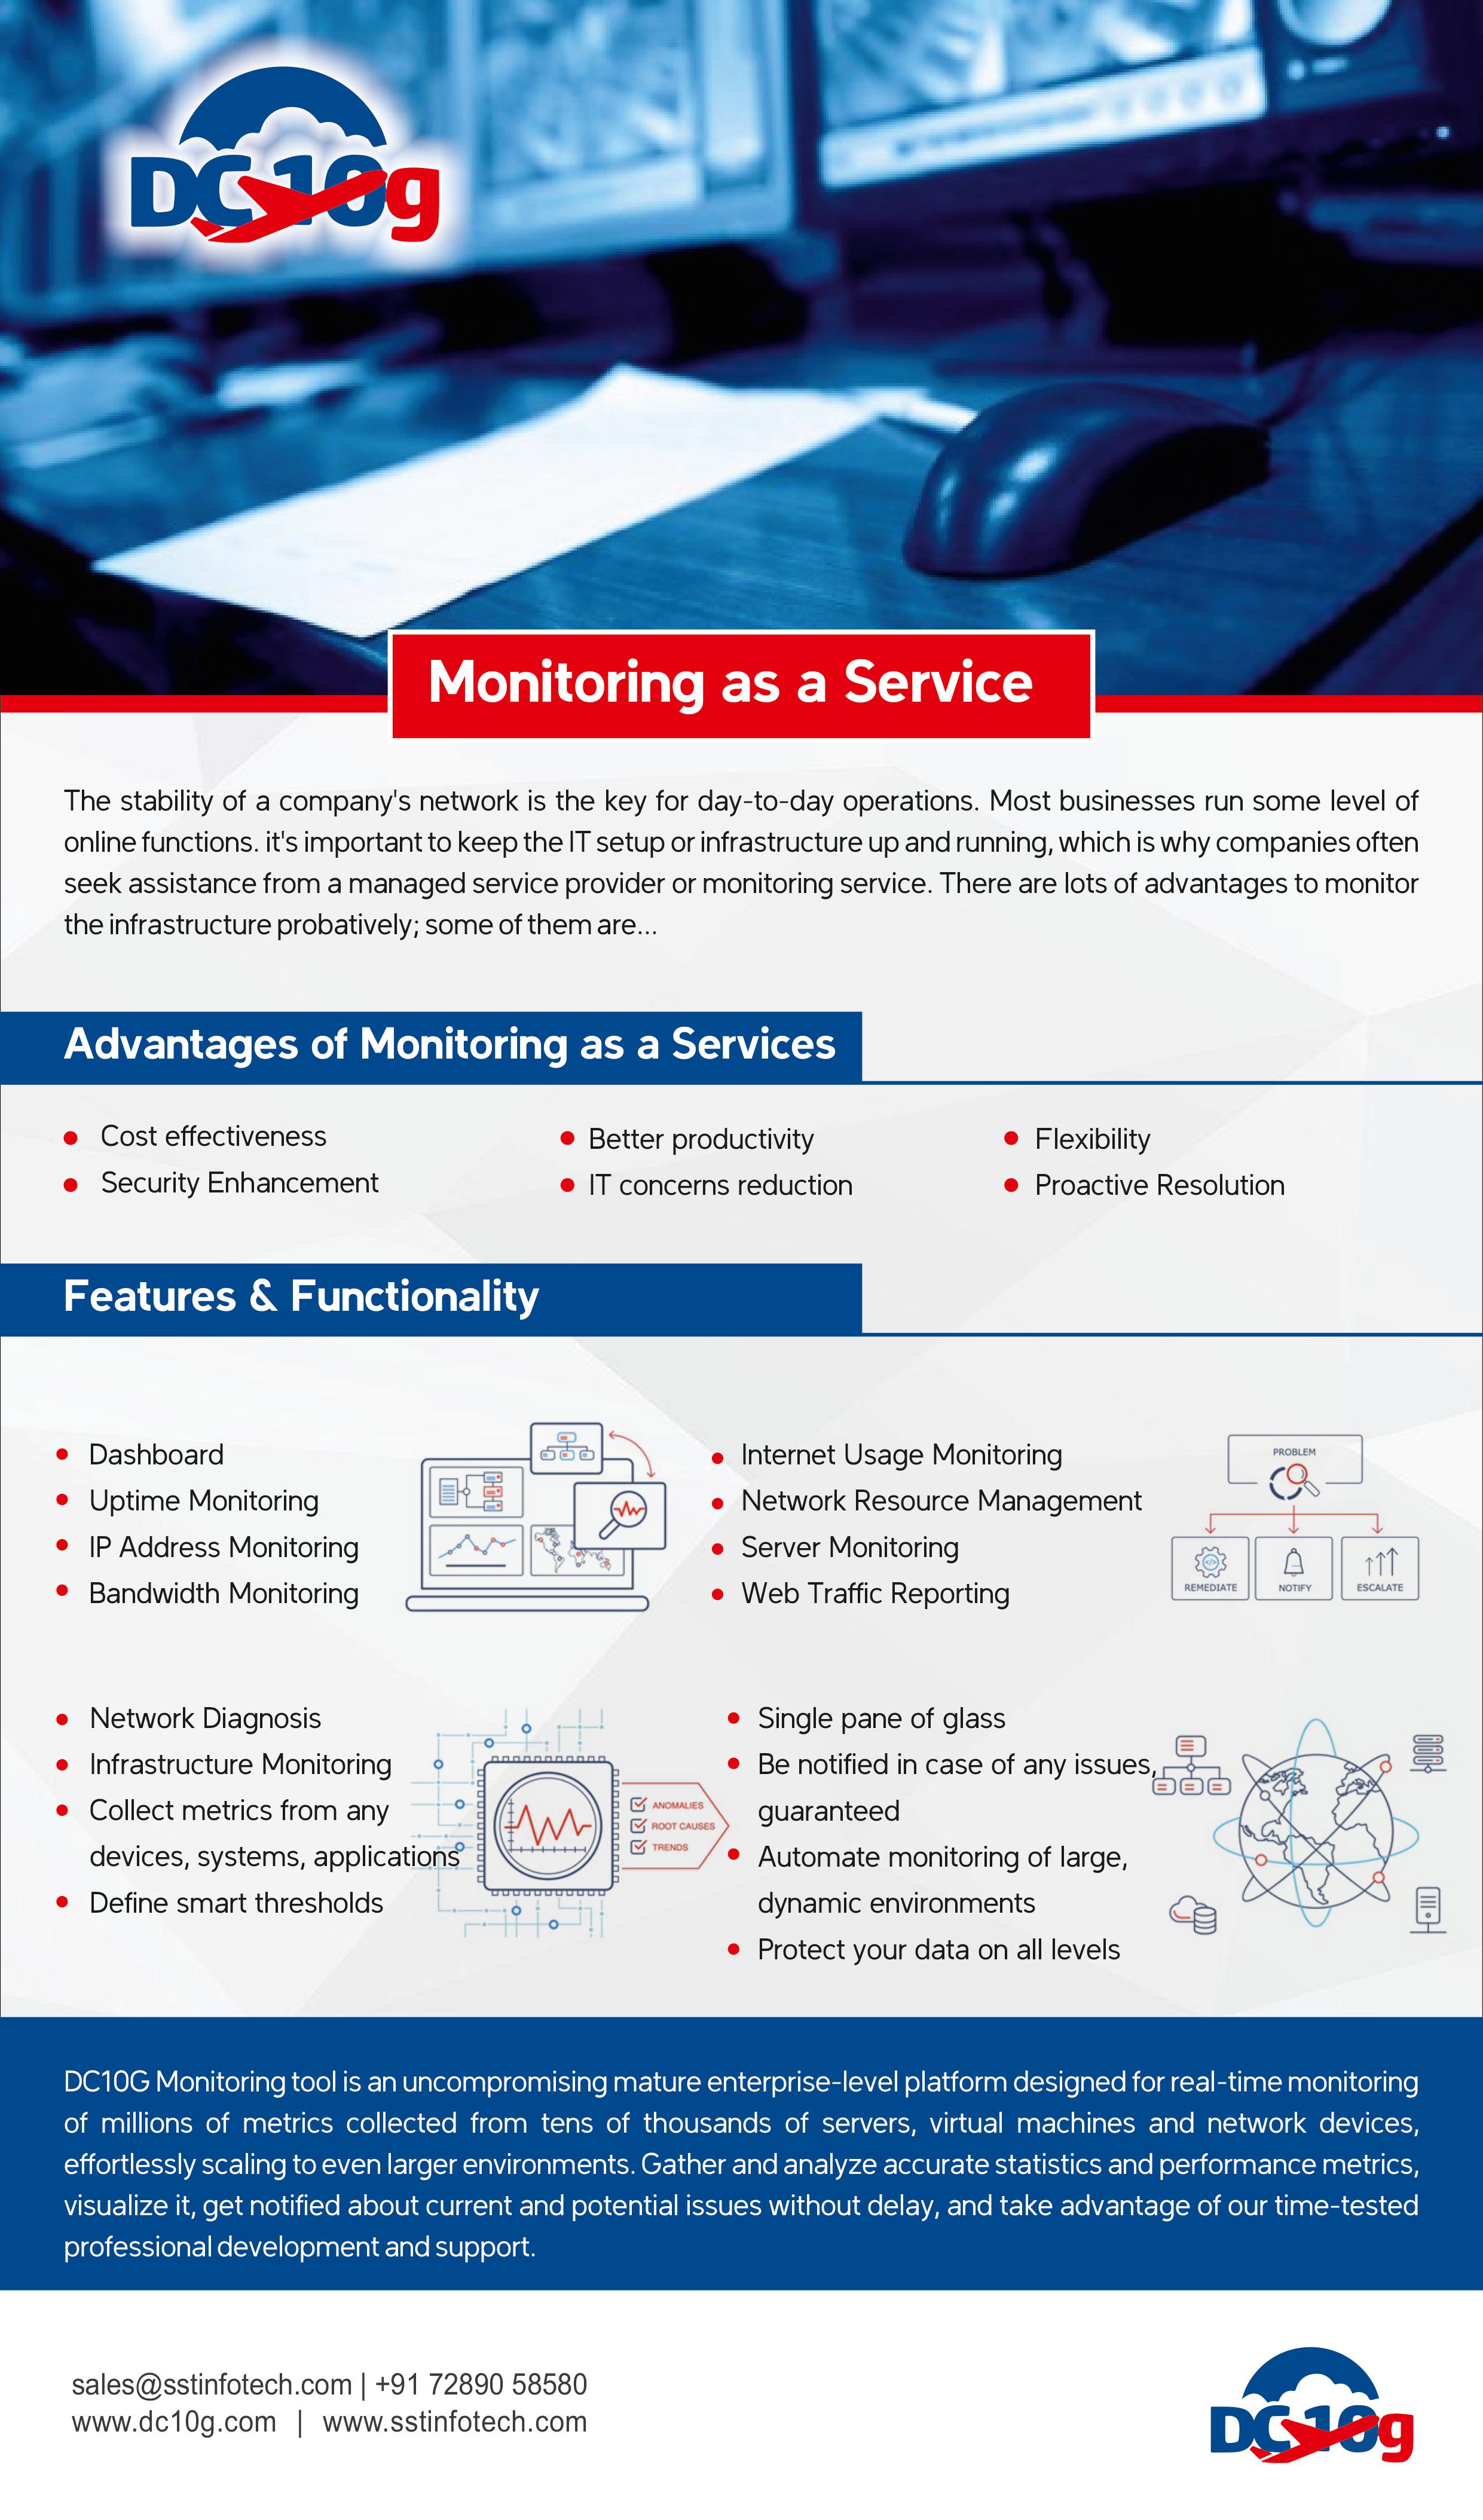 Advantages of monitoring as a service